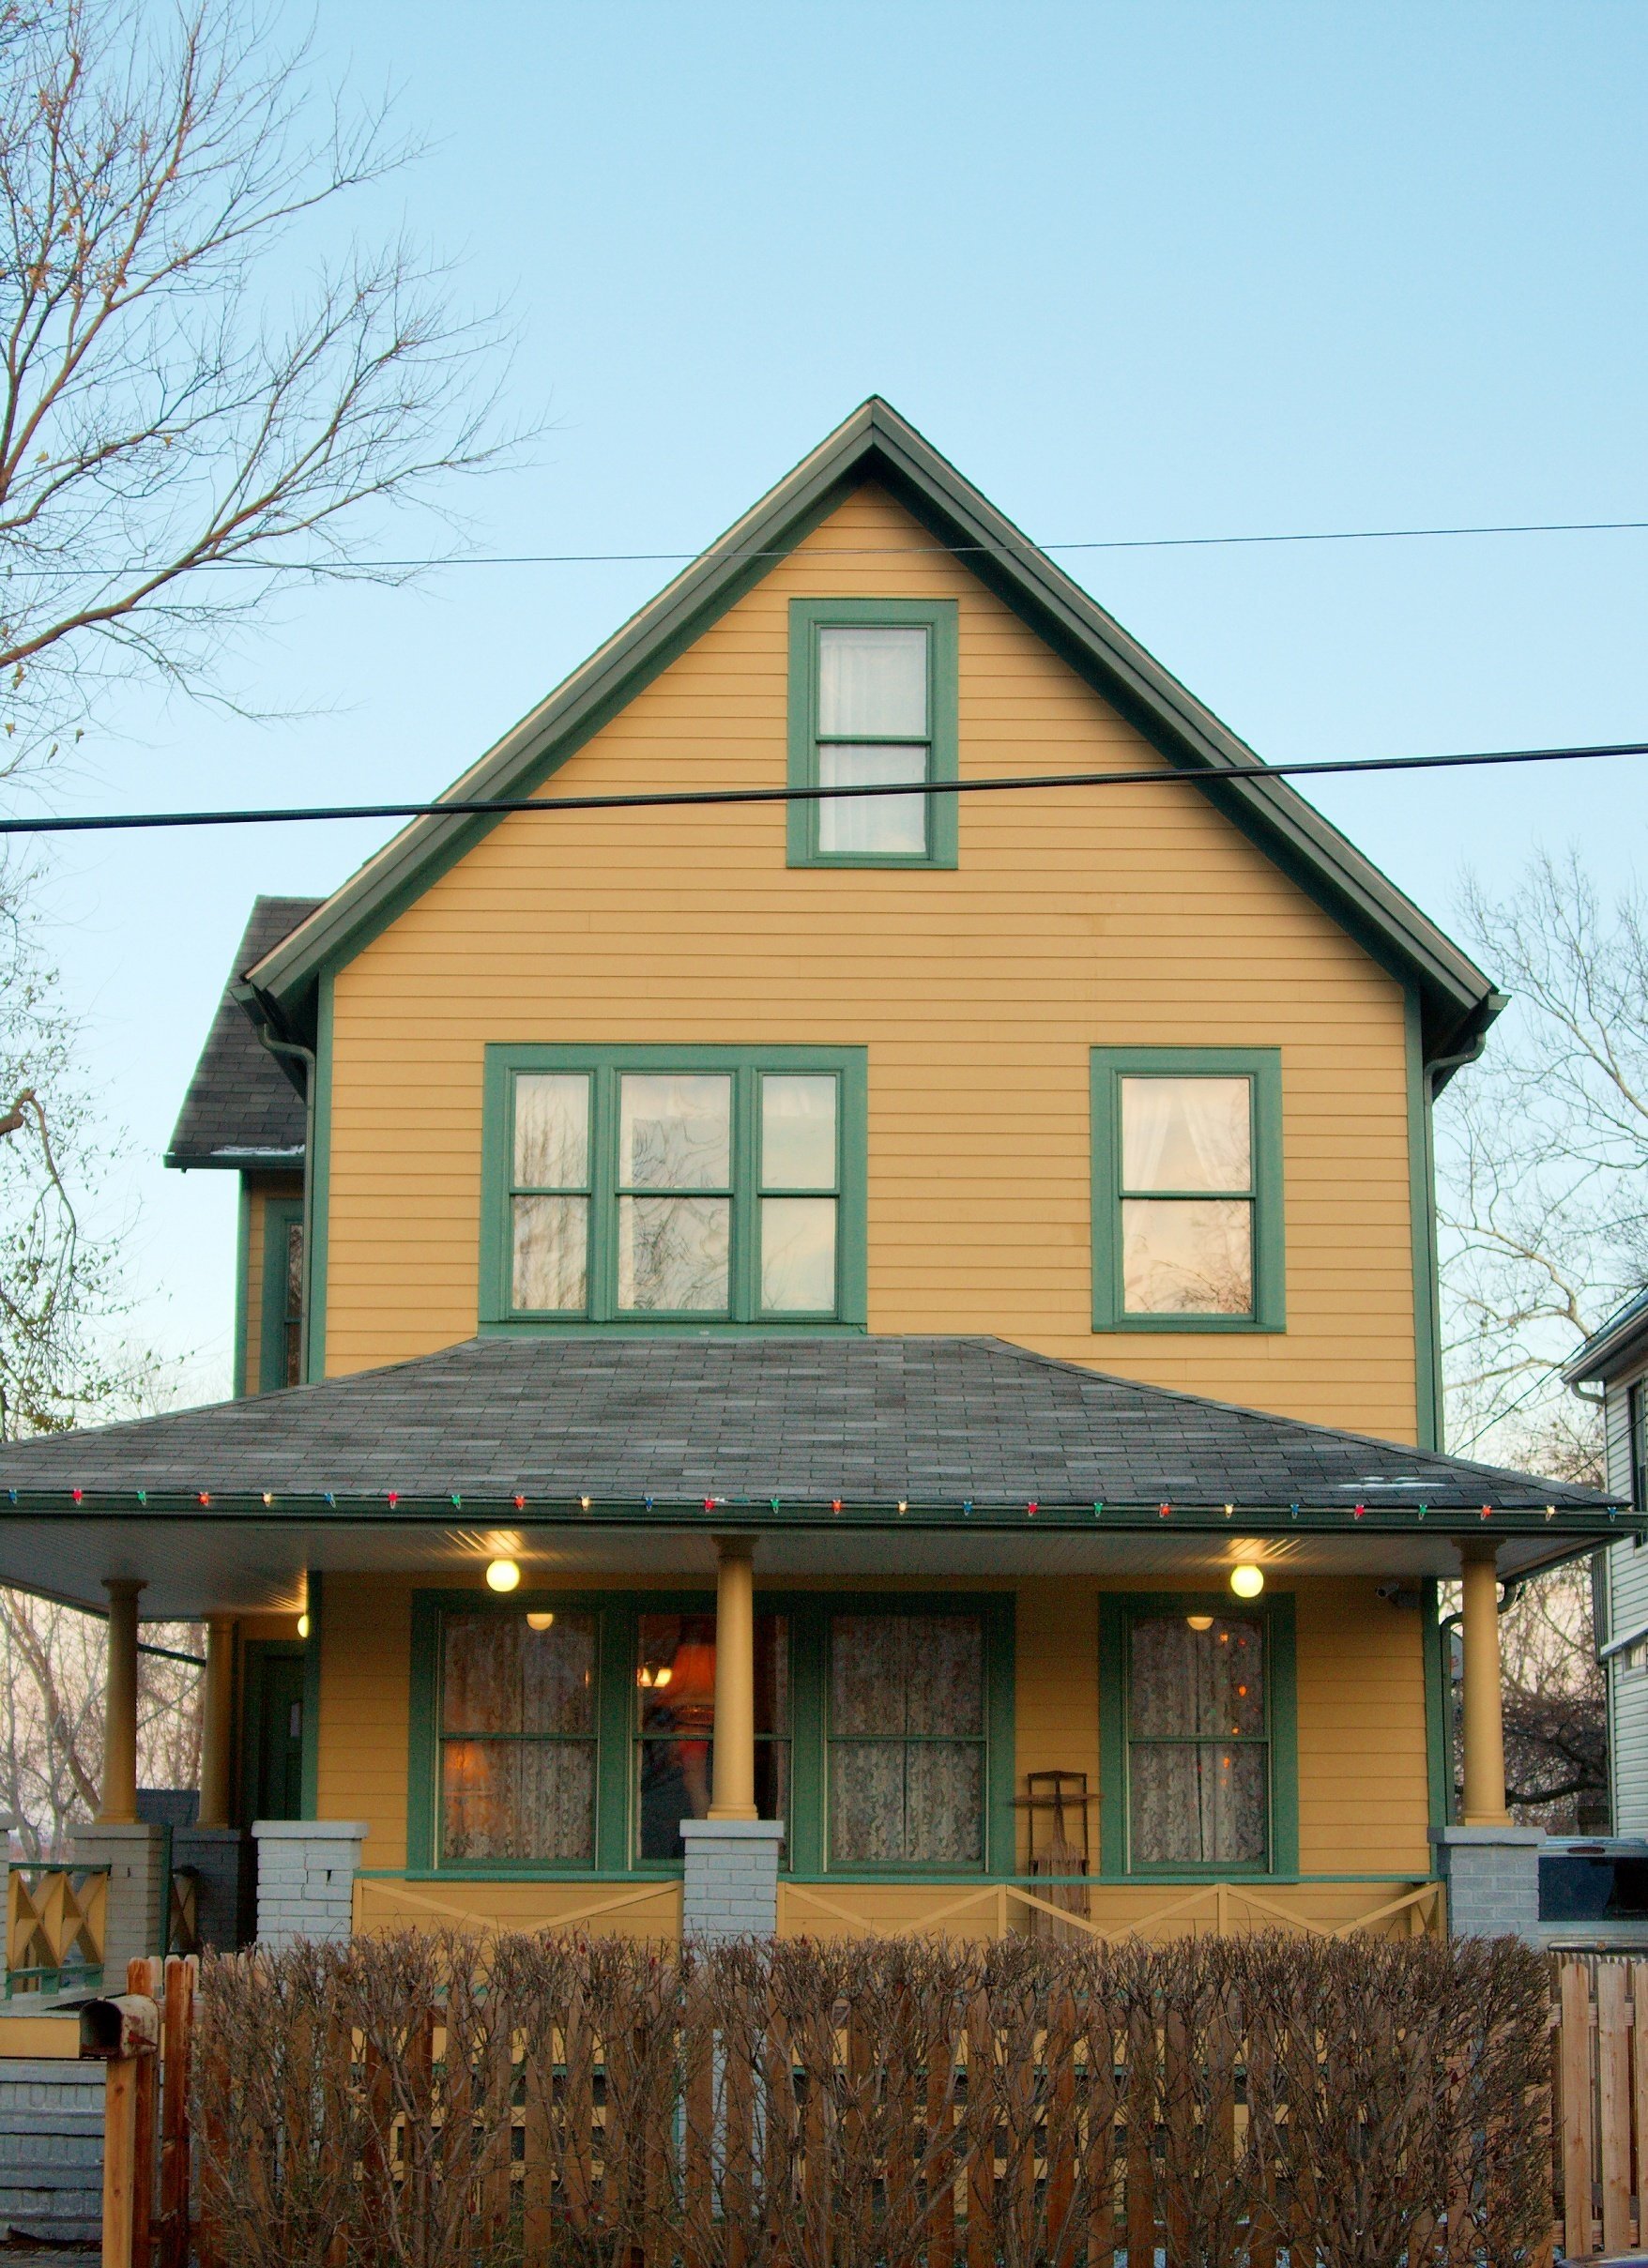 The house from 'A Christmas Story' in Cleveland, Ohio 